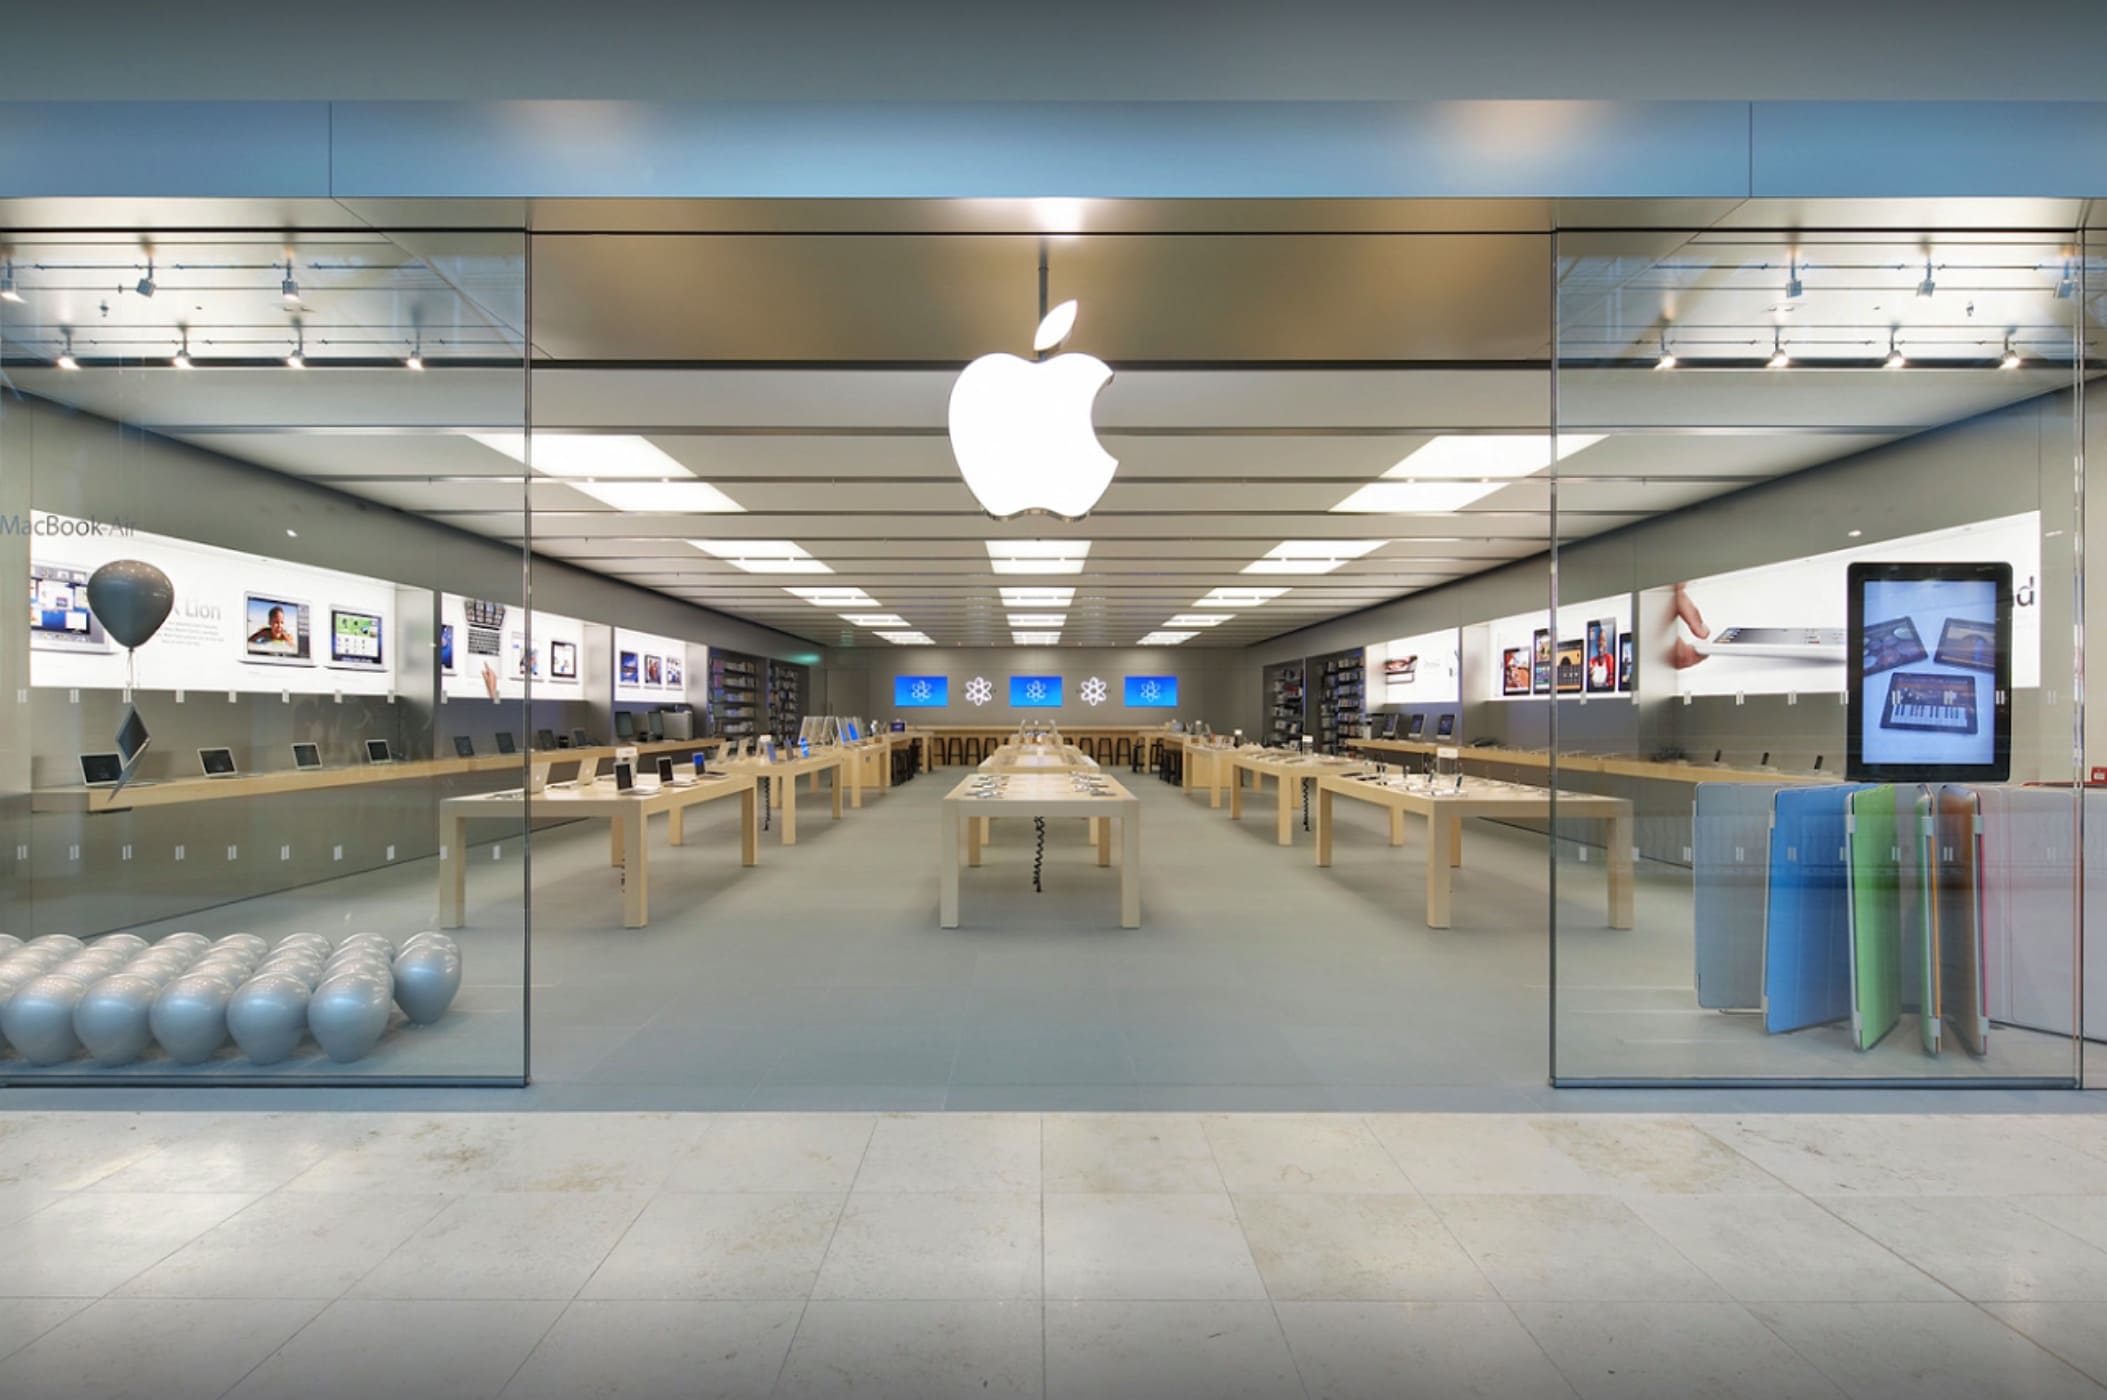 U.K. cops used a helicopter to help chase down Apple Store thieves